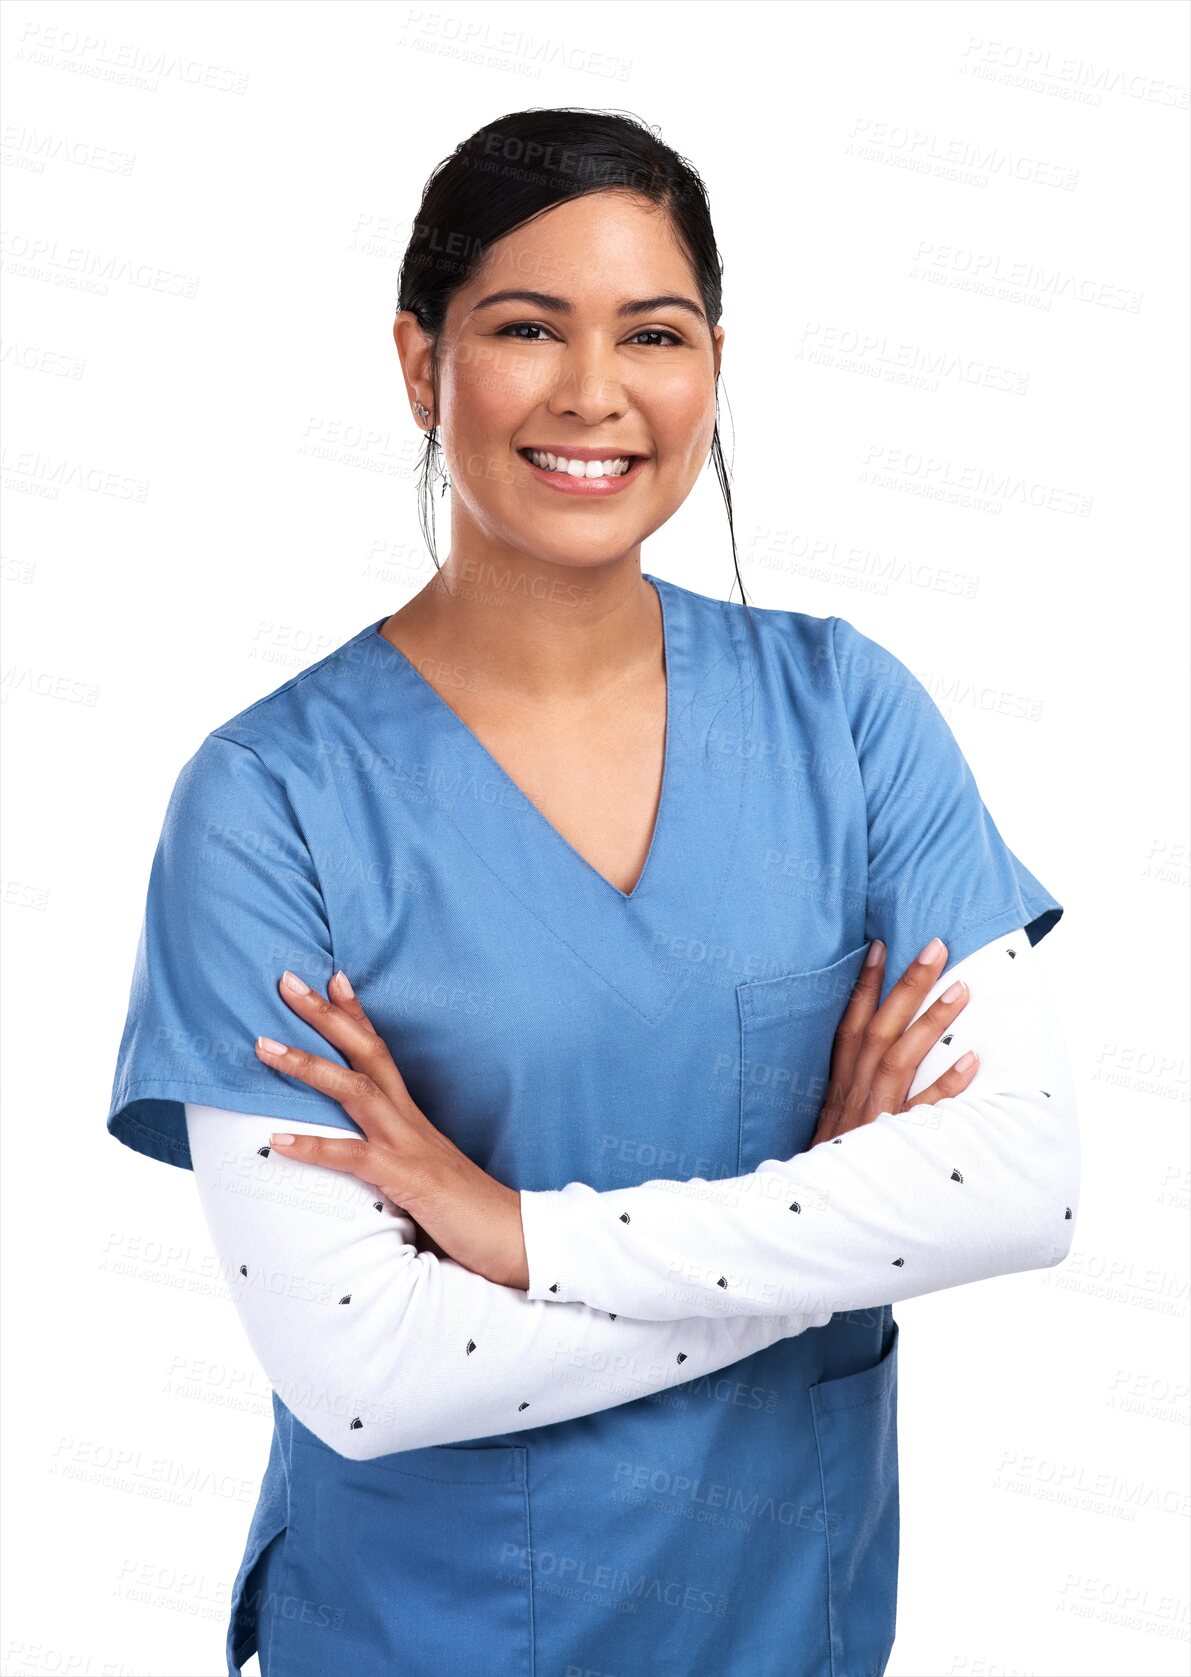 Buy stock photo Nurse in portrait, woman with arms crossed and happy healthcare professional isolated on transparent png background. Female doctor, medicine and smile of hospital staff, health and pride for nursing